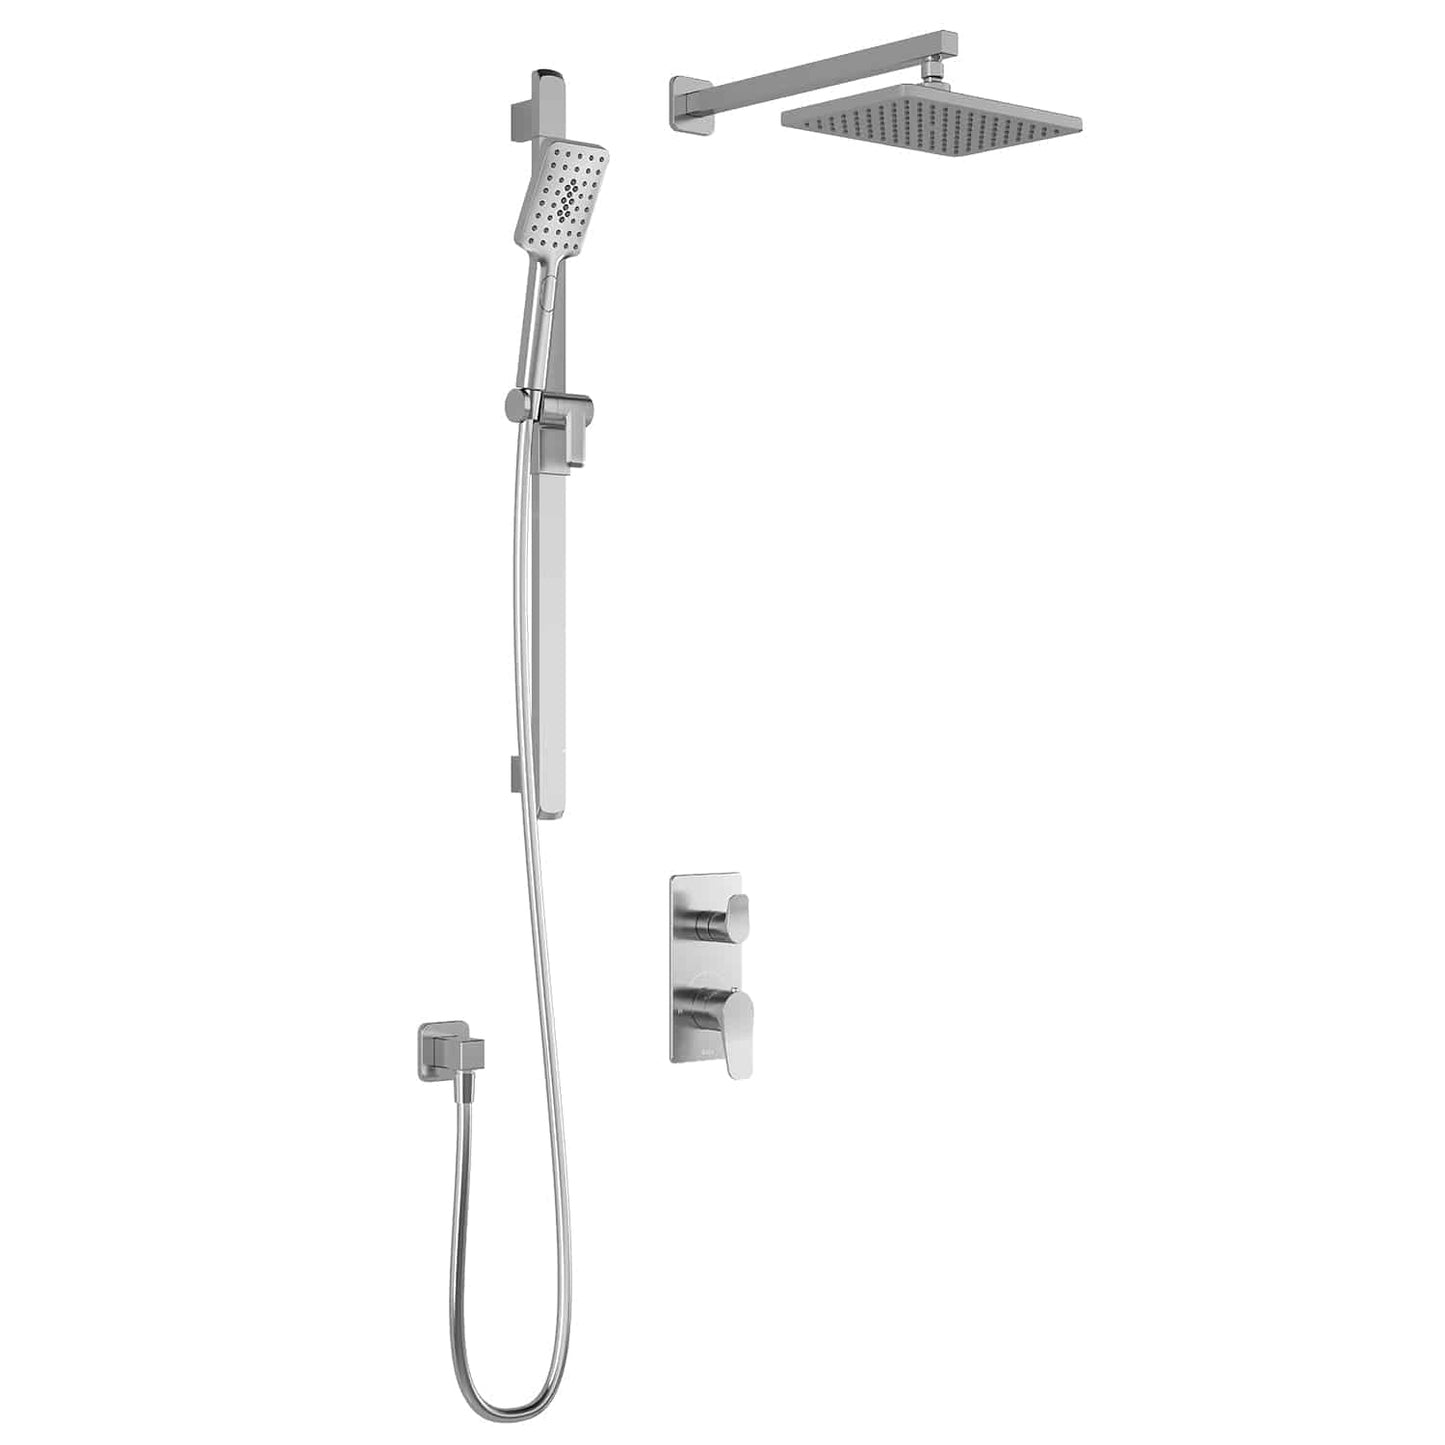 Kalia MOROKA TD2 (Valve Not Included) AQUATONIK T/P with Diverter Shower System with Wall Arm -Chrome